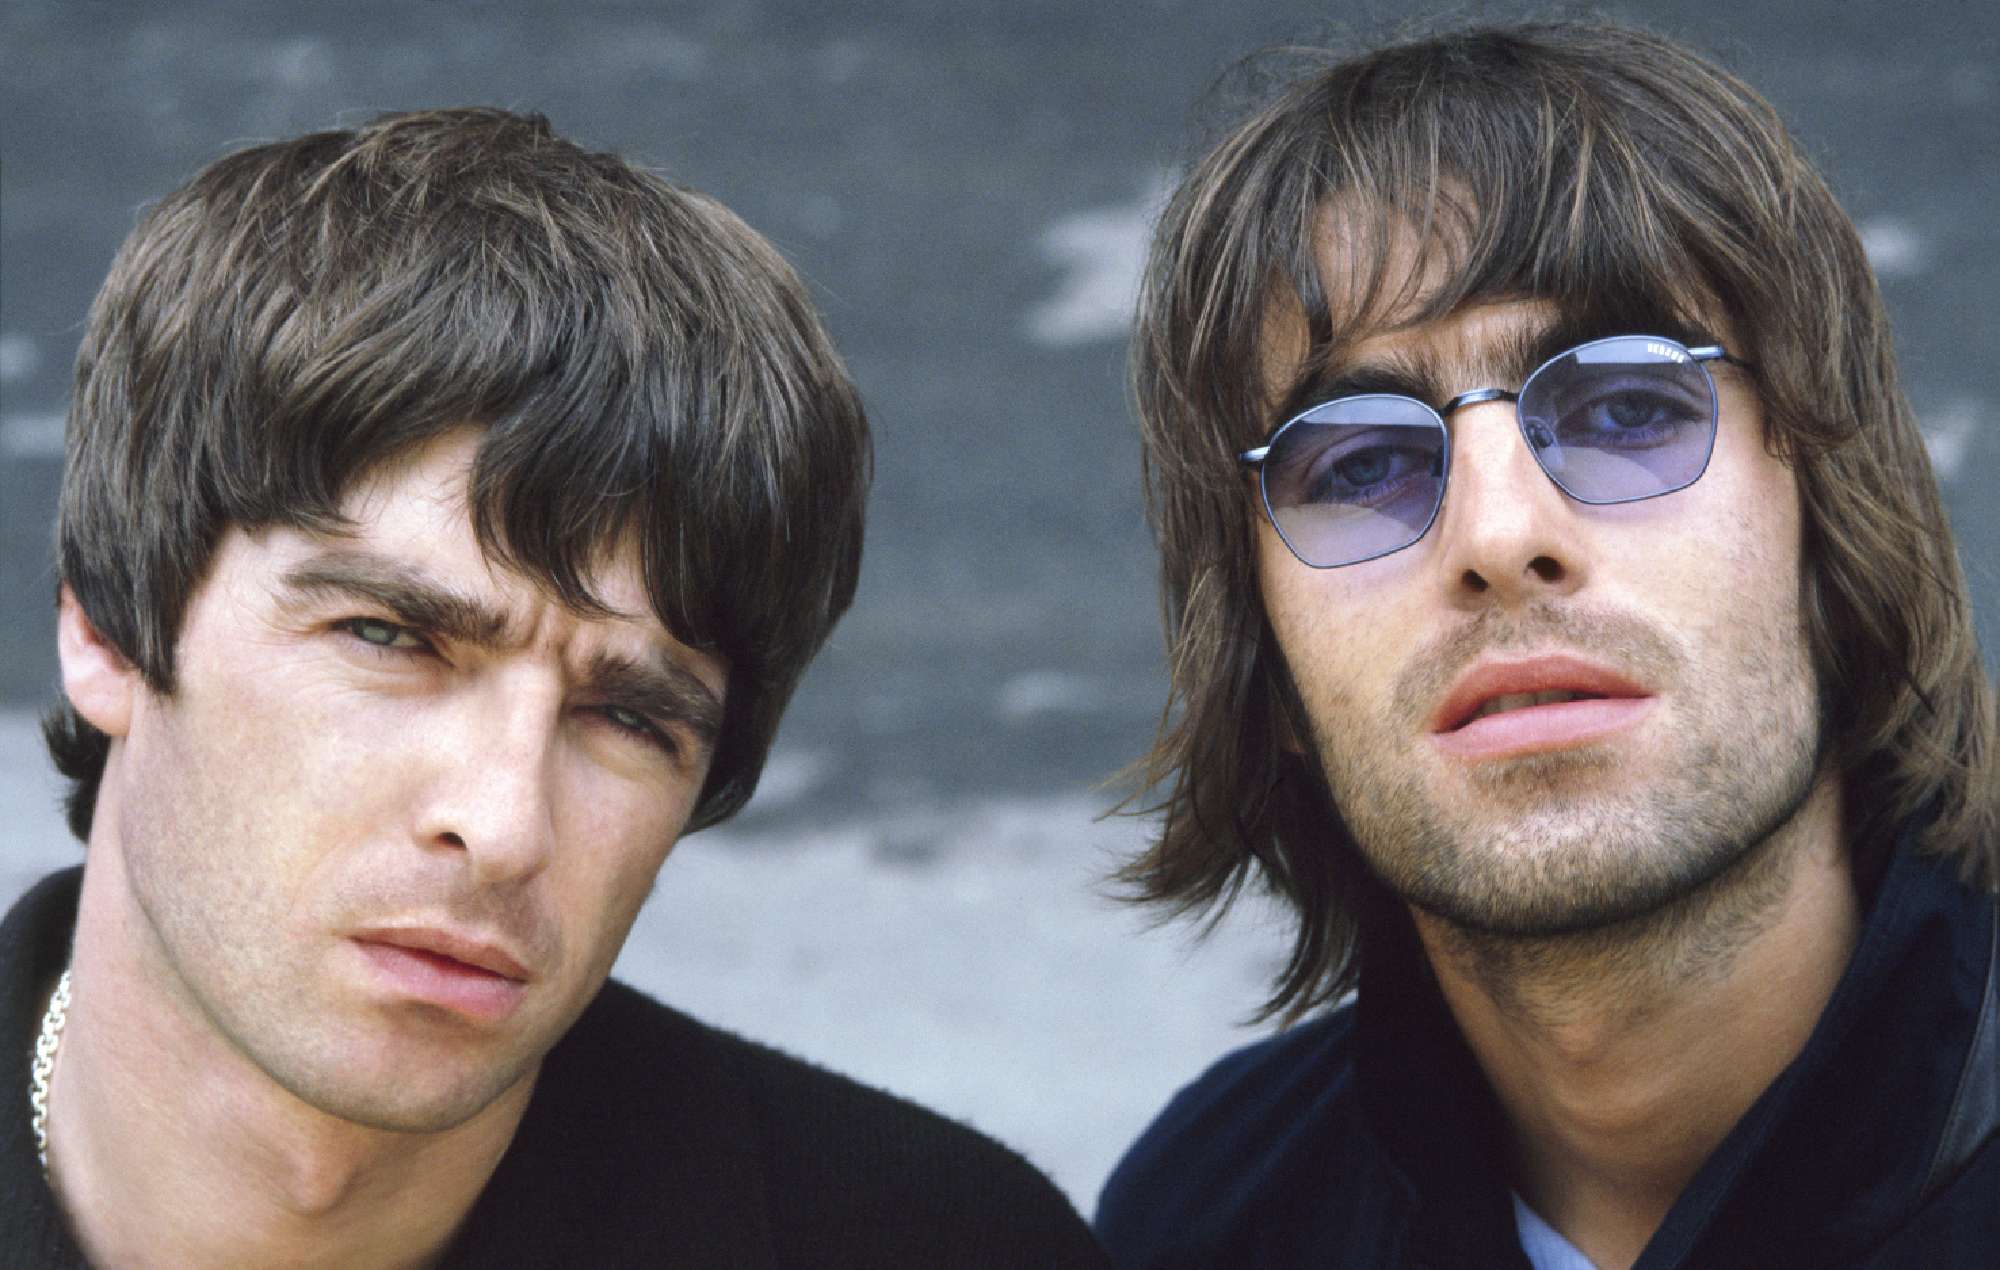 Oasis announce 25th anniversary reissue of ‘The Masterplan’ B-sides collection